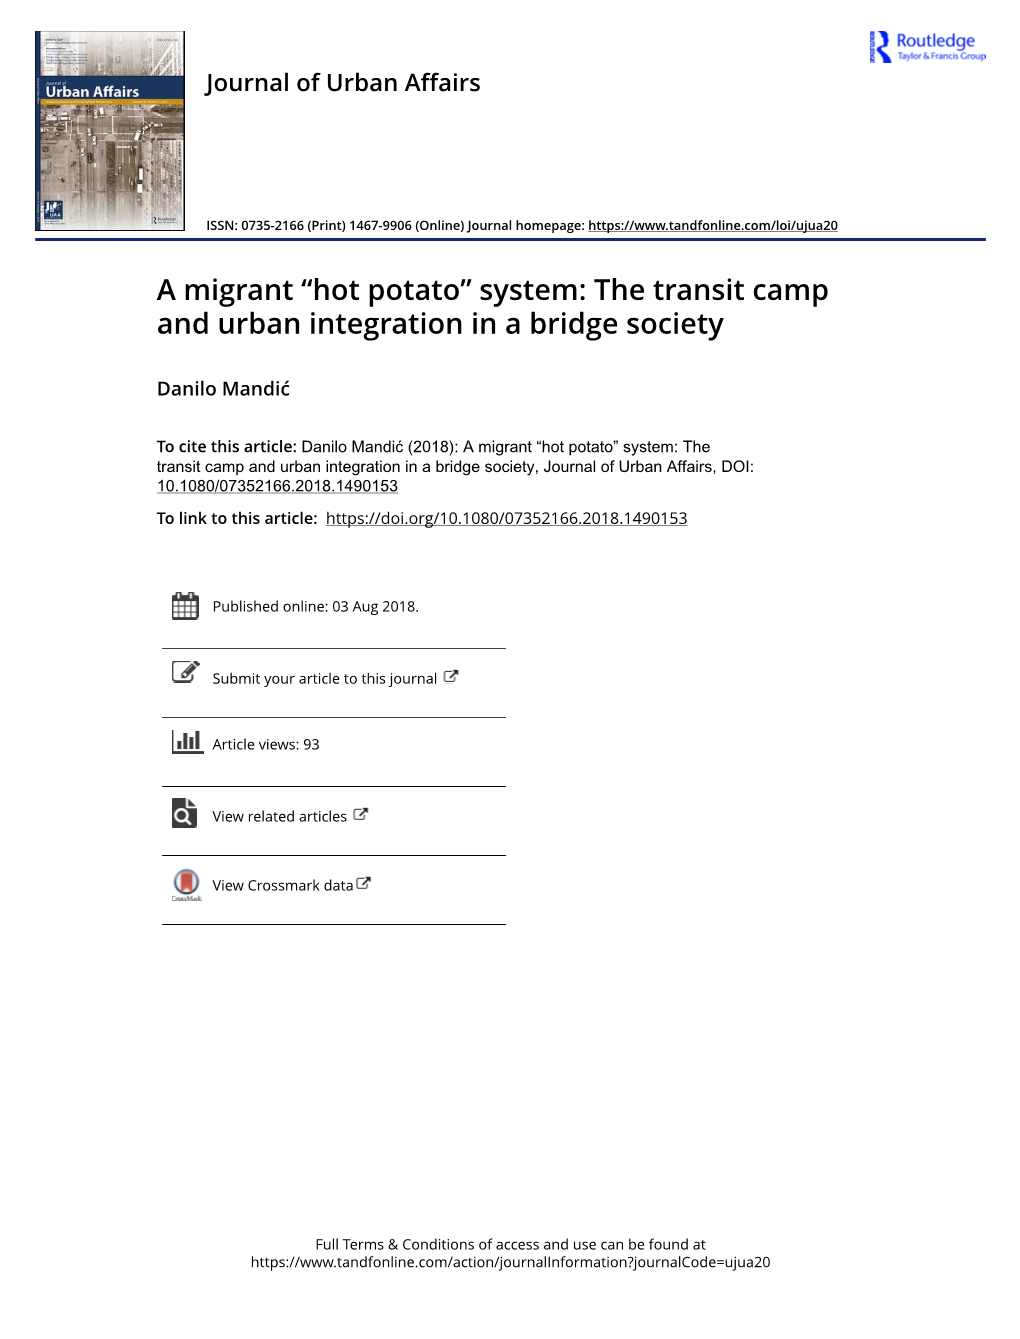 A Migrant “Hot Potato” System: the Transit Camp and Urban Integration in a Bridge Society